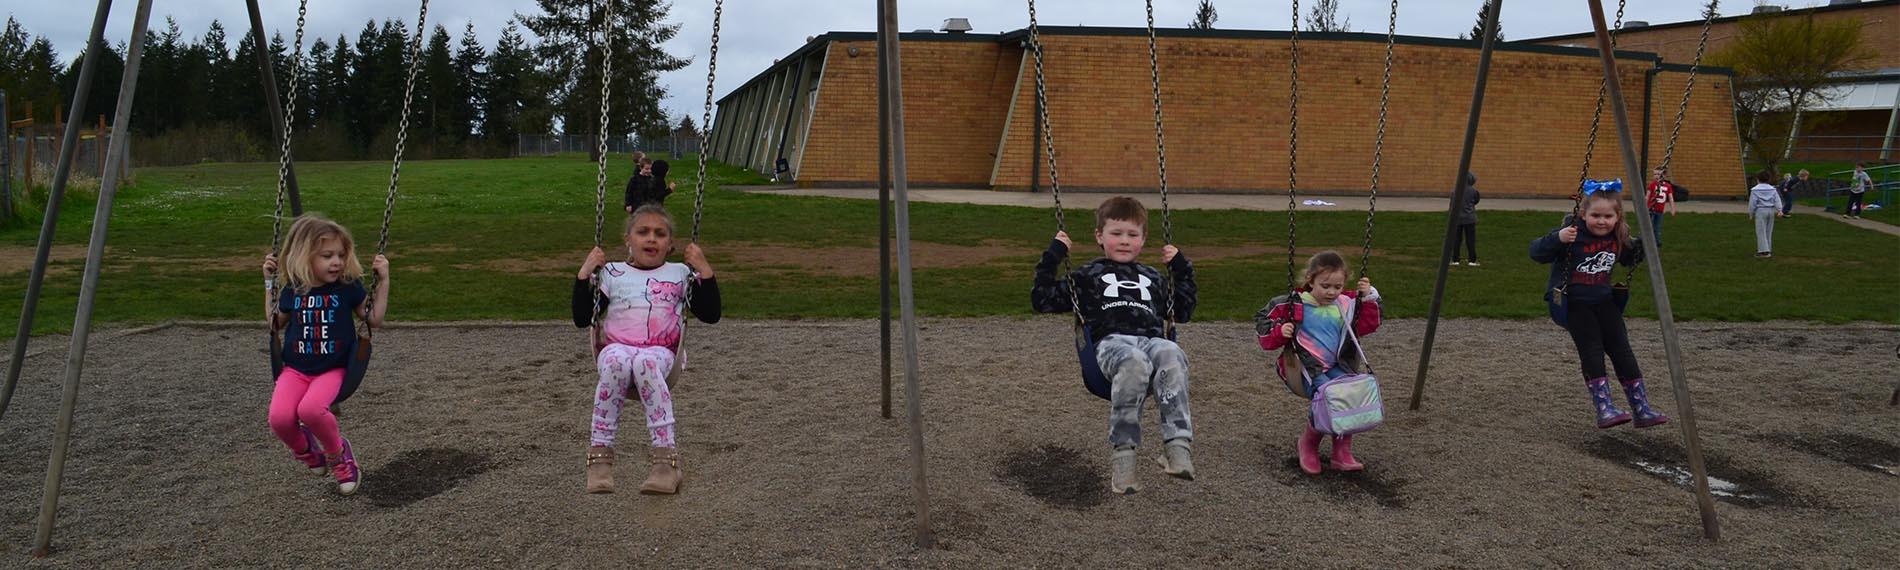 Kindergarten and first grade students swinging at recess